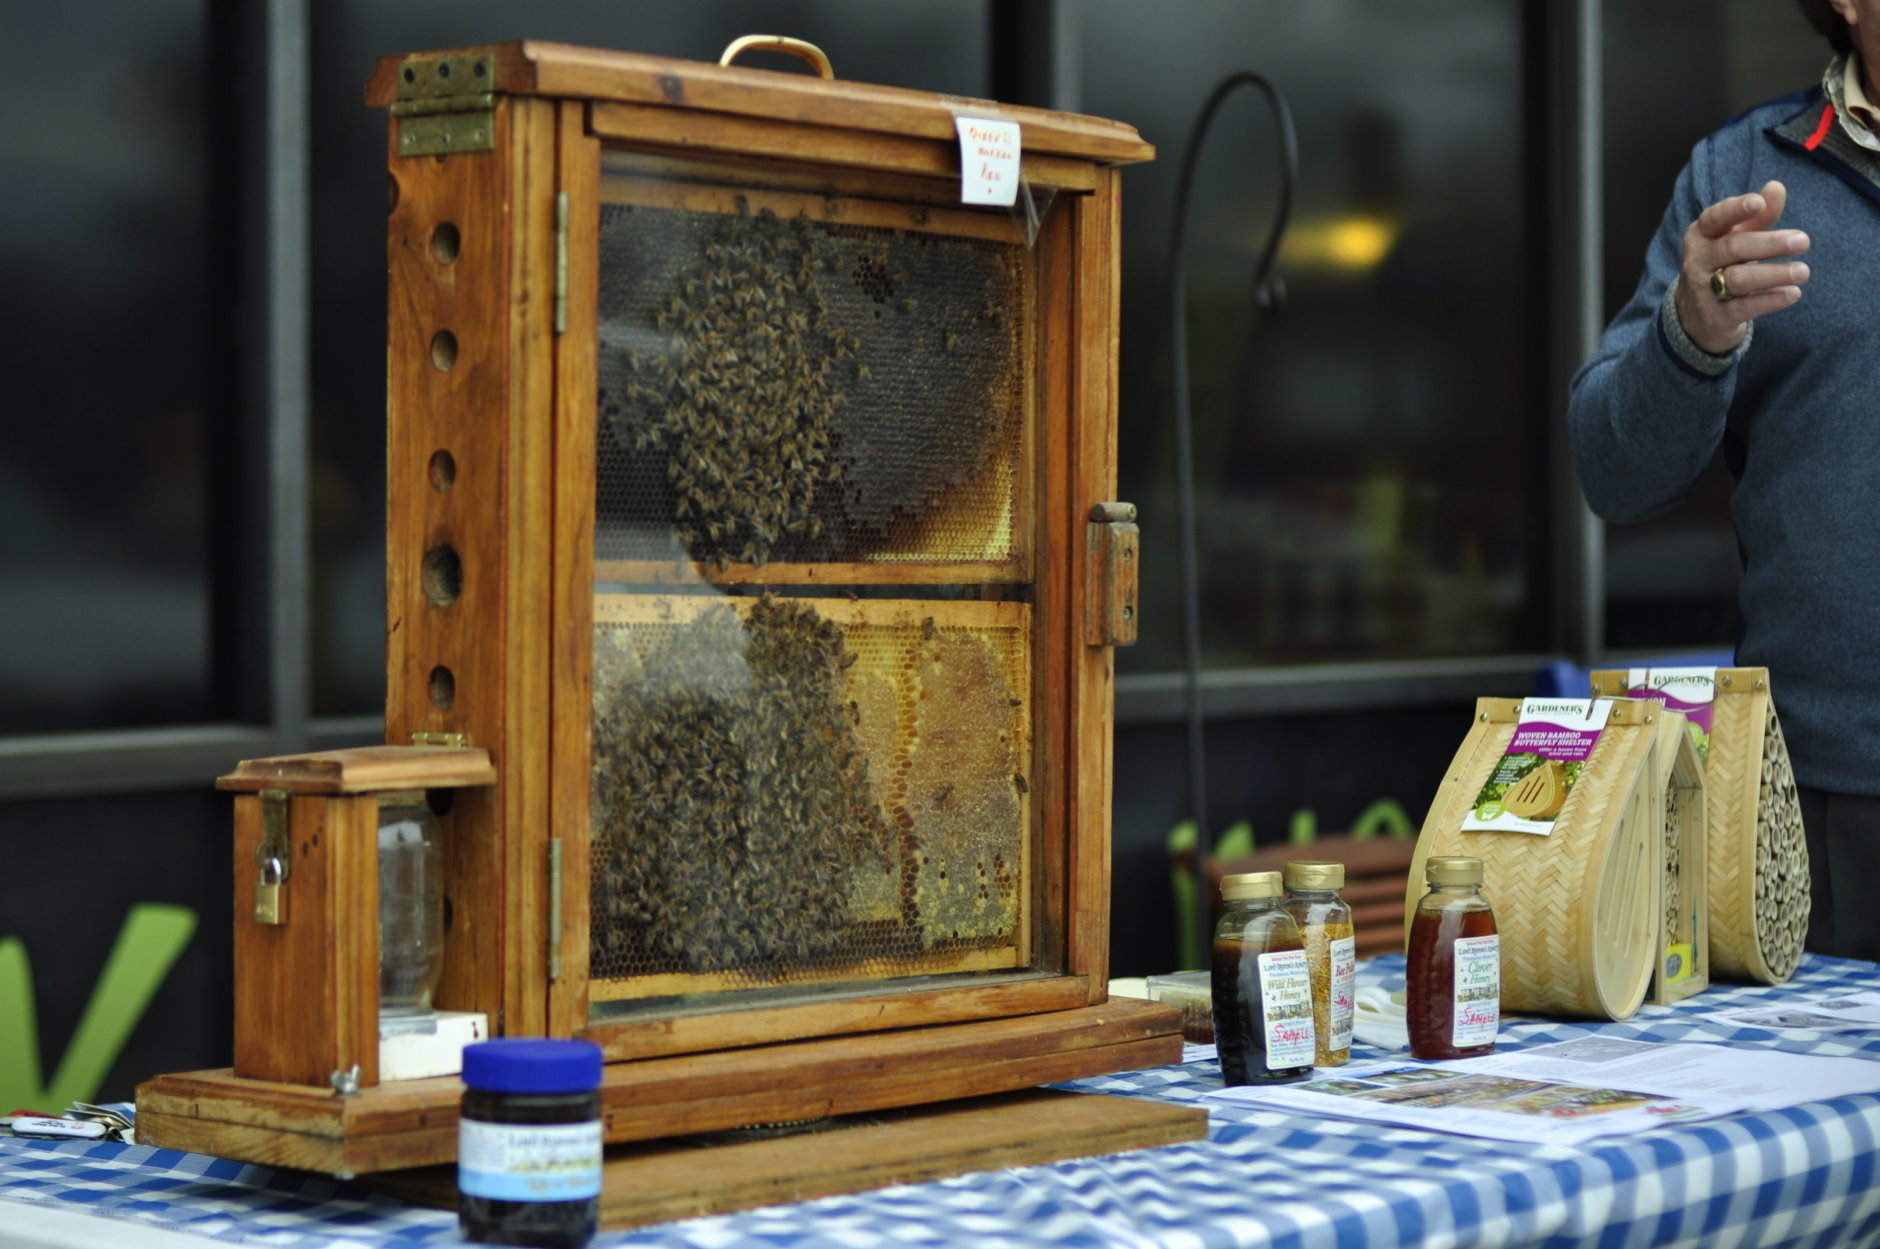 Backyard beekeeping is another environmentally conscious activity that people can do according to MOM's. (Courtesy MOM's Organic Market)